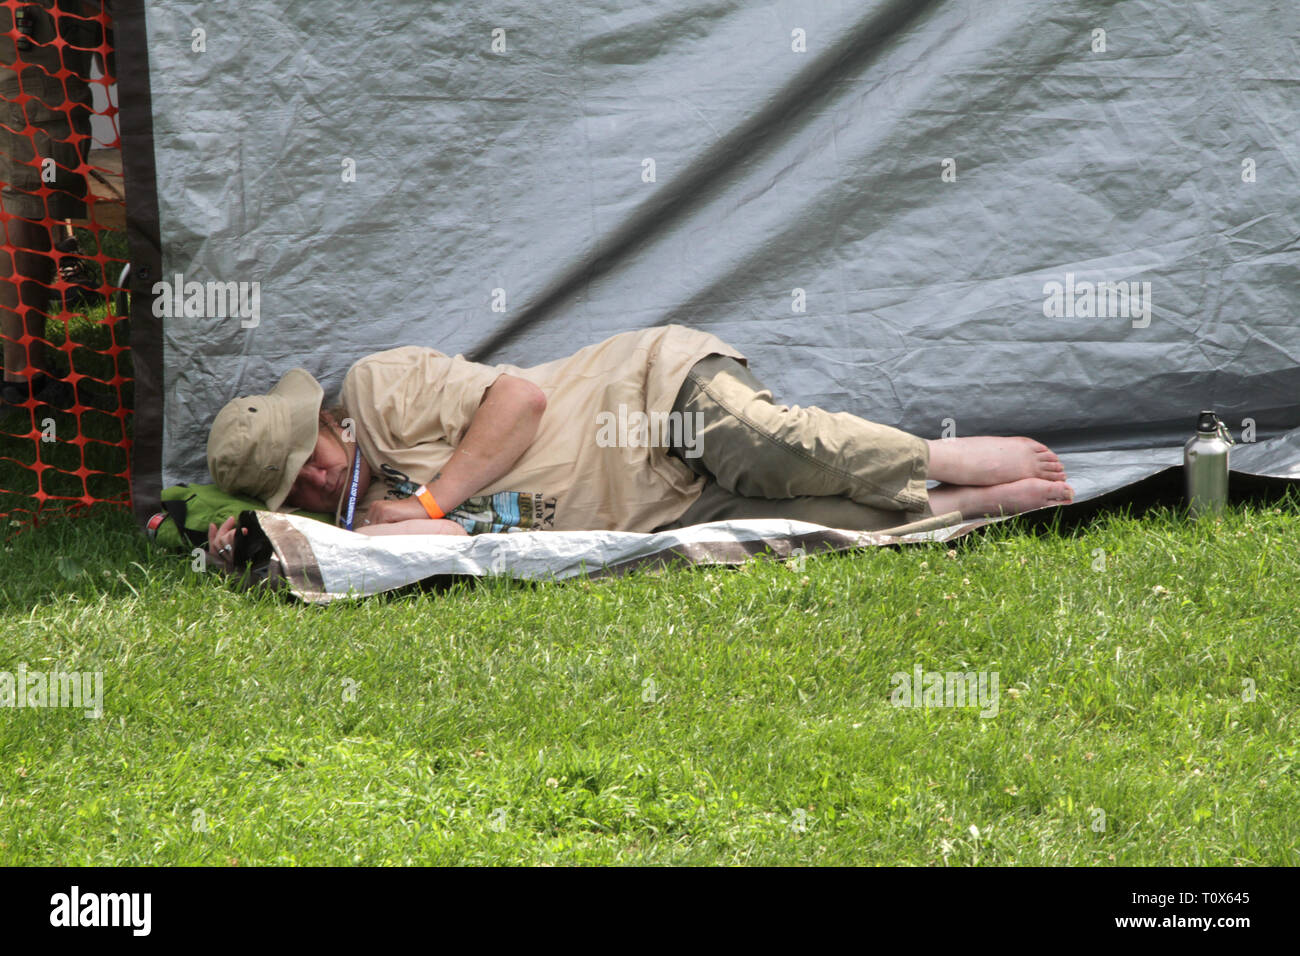 A concert goer is shown taking a quick nap during an outdoor music festival event. Stock Photo